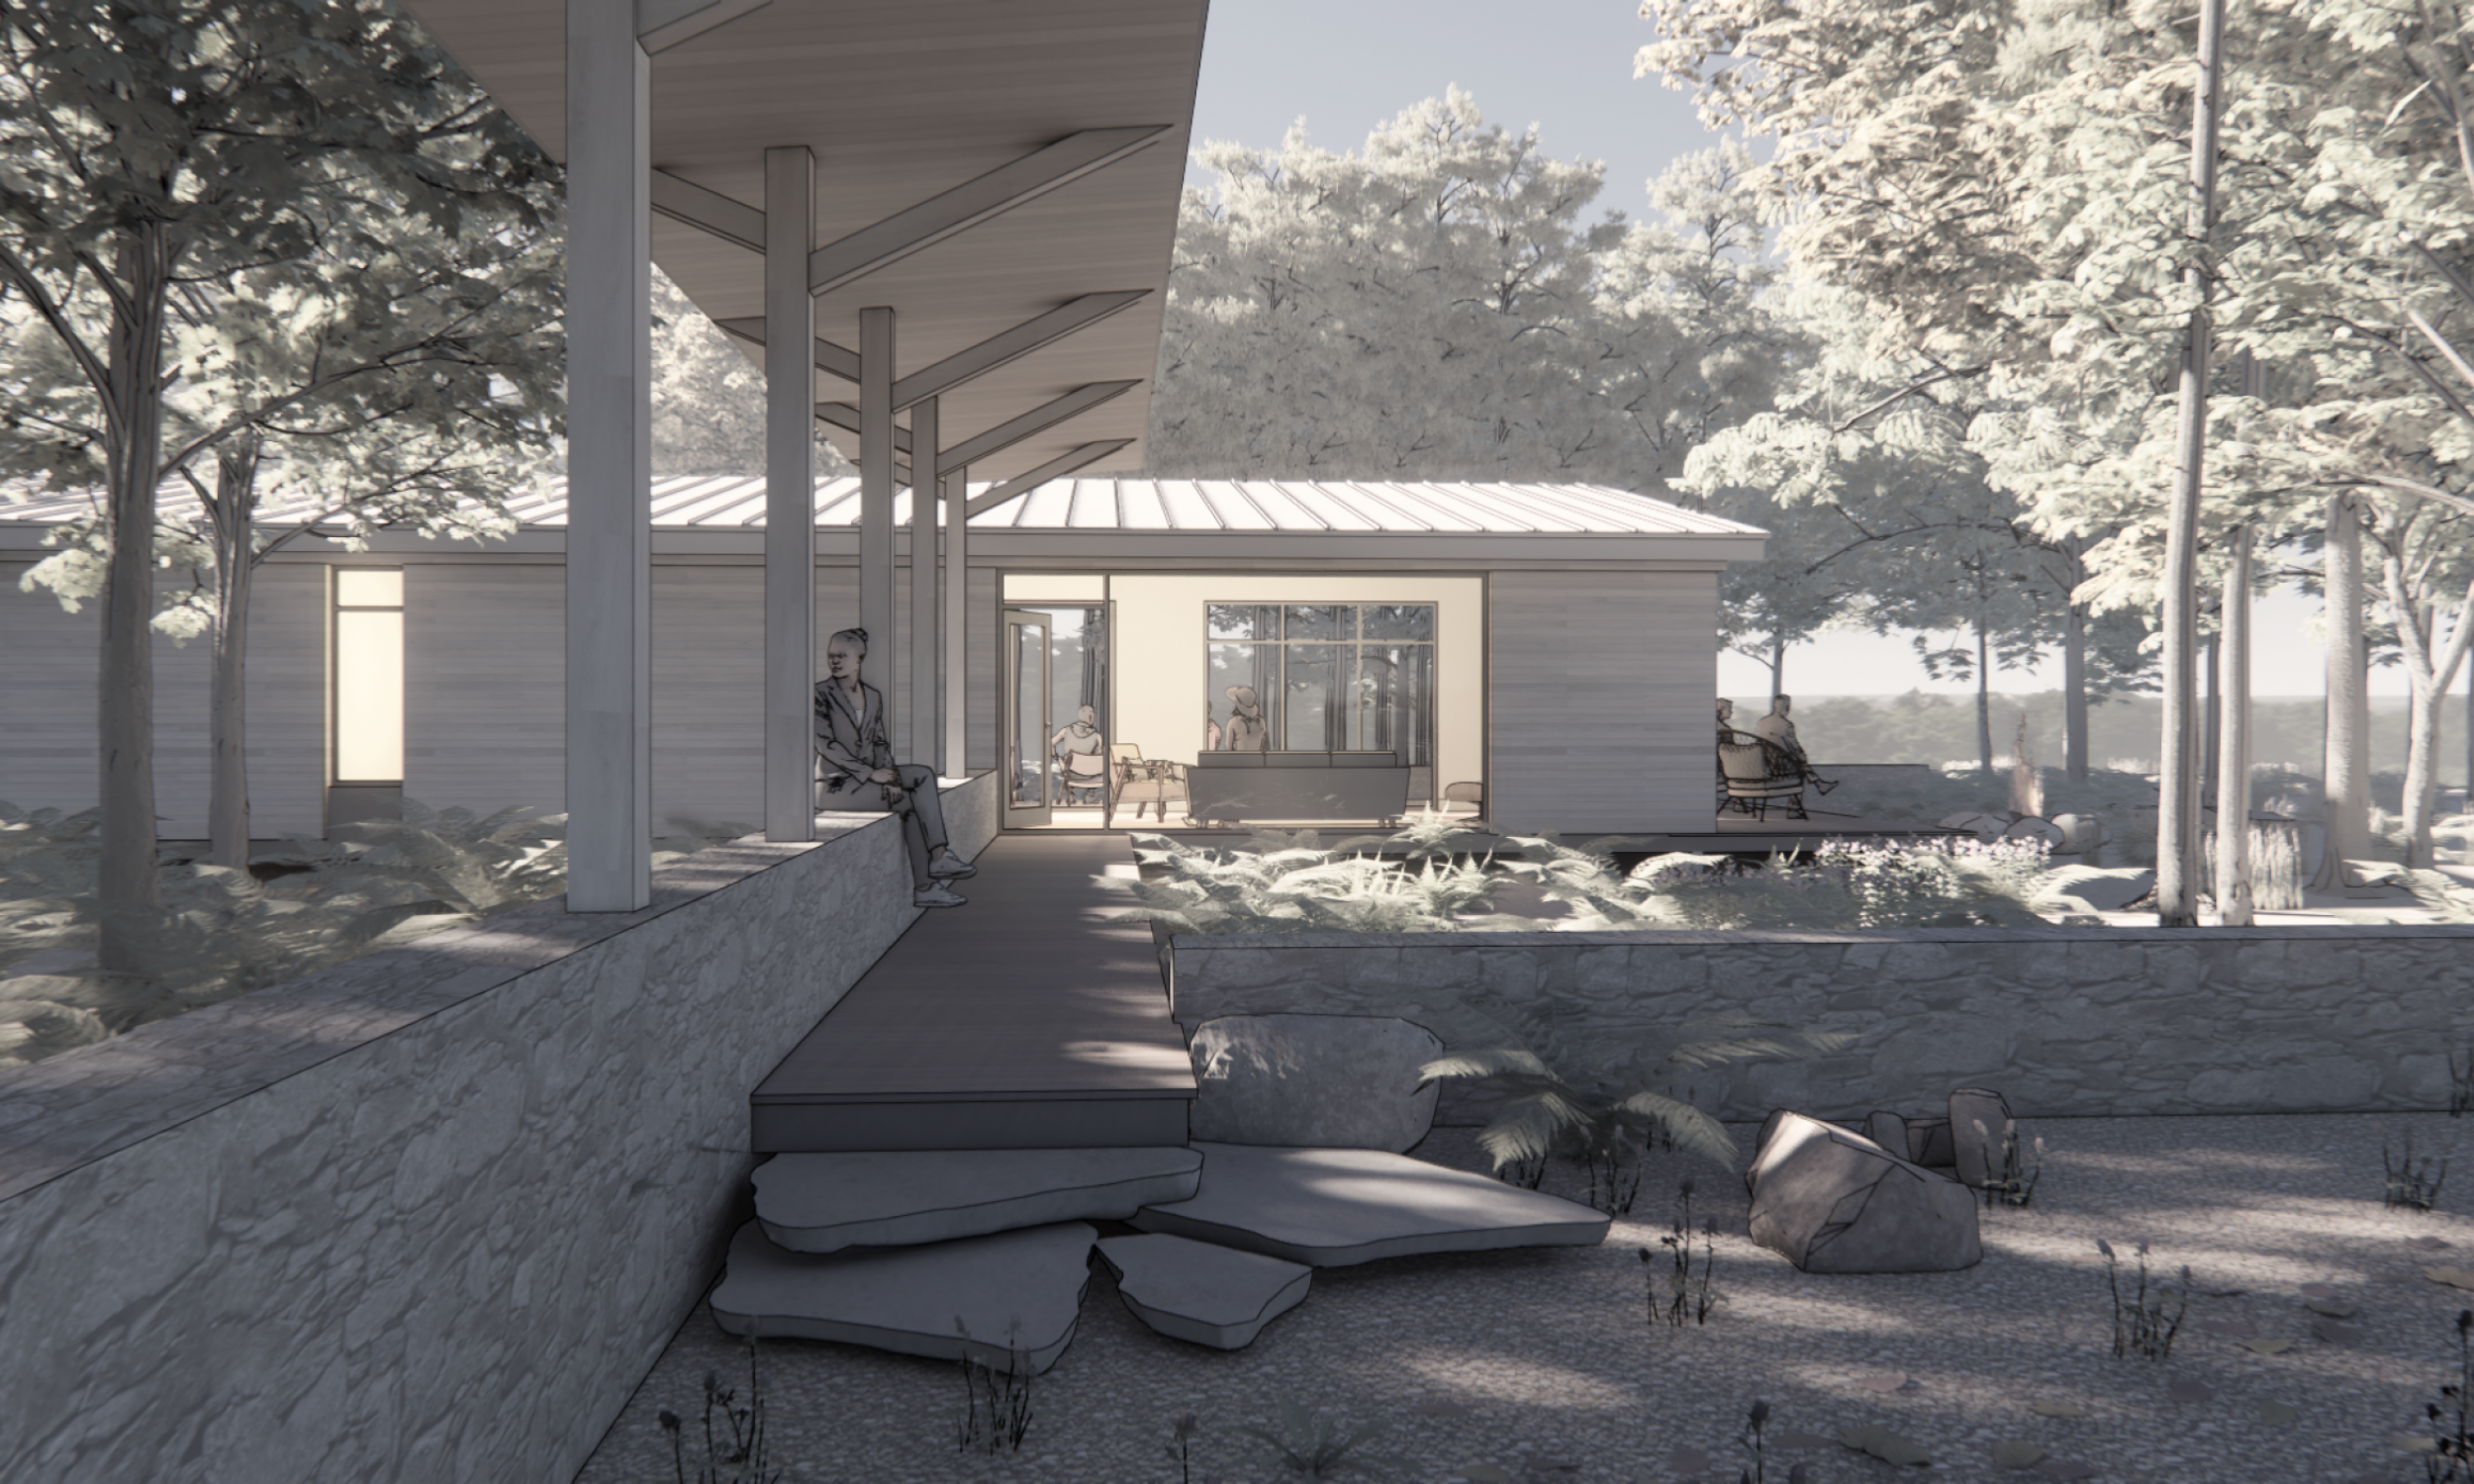 Maine Architect, Sustainable design, Natural materials, Prefabricated construction